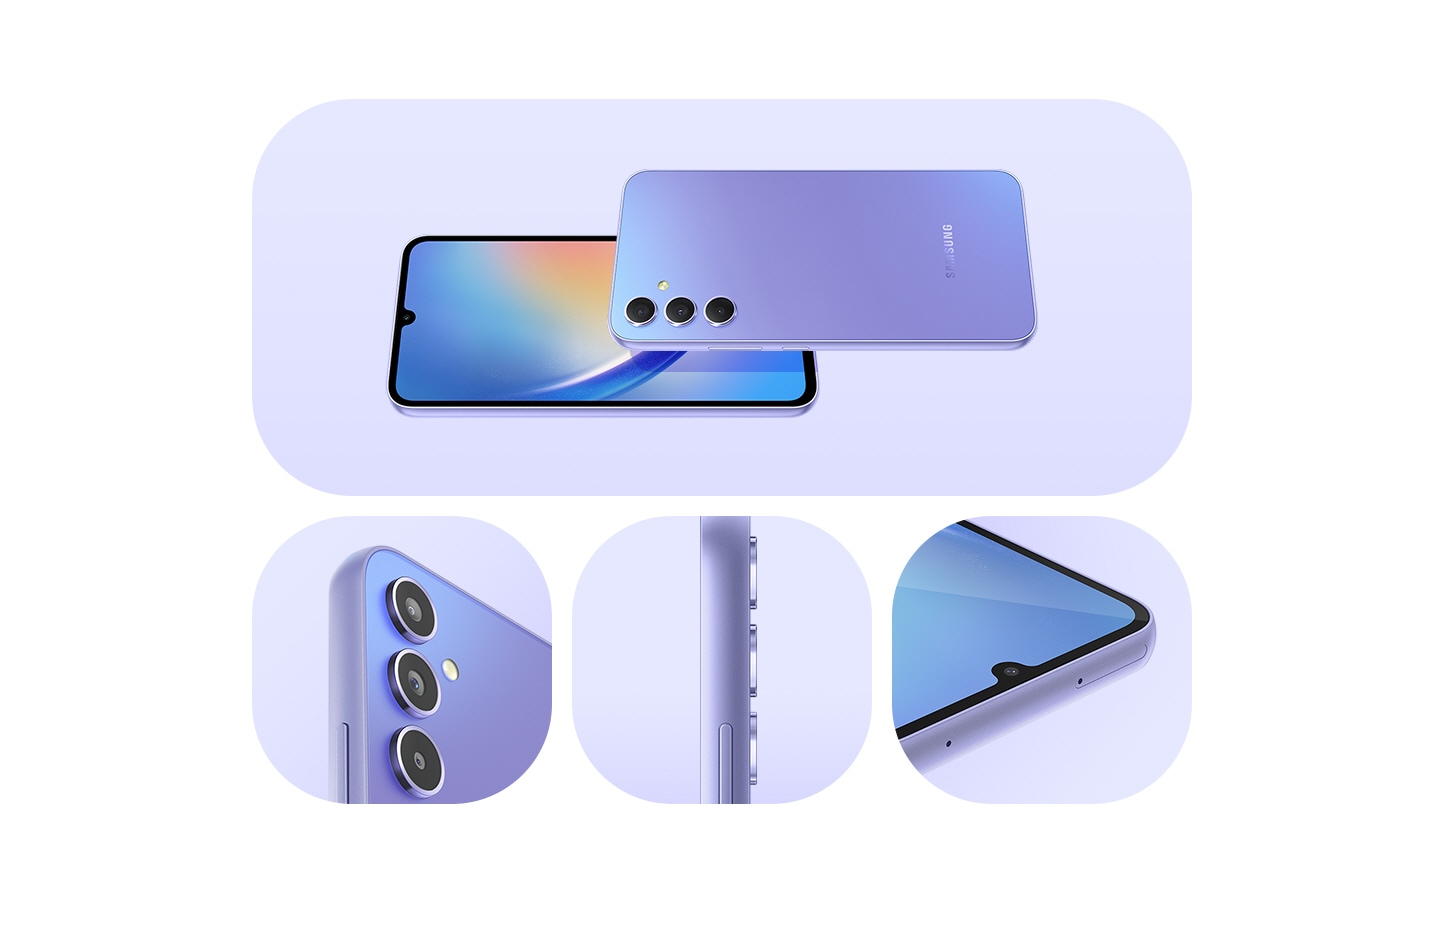 3. The Galaxy A34 5G's design is shown with devices in Awesome Violet. The front and backsides are shown, along with more close-up shots of the backside multi-camera system, the side, and front camera.